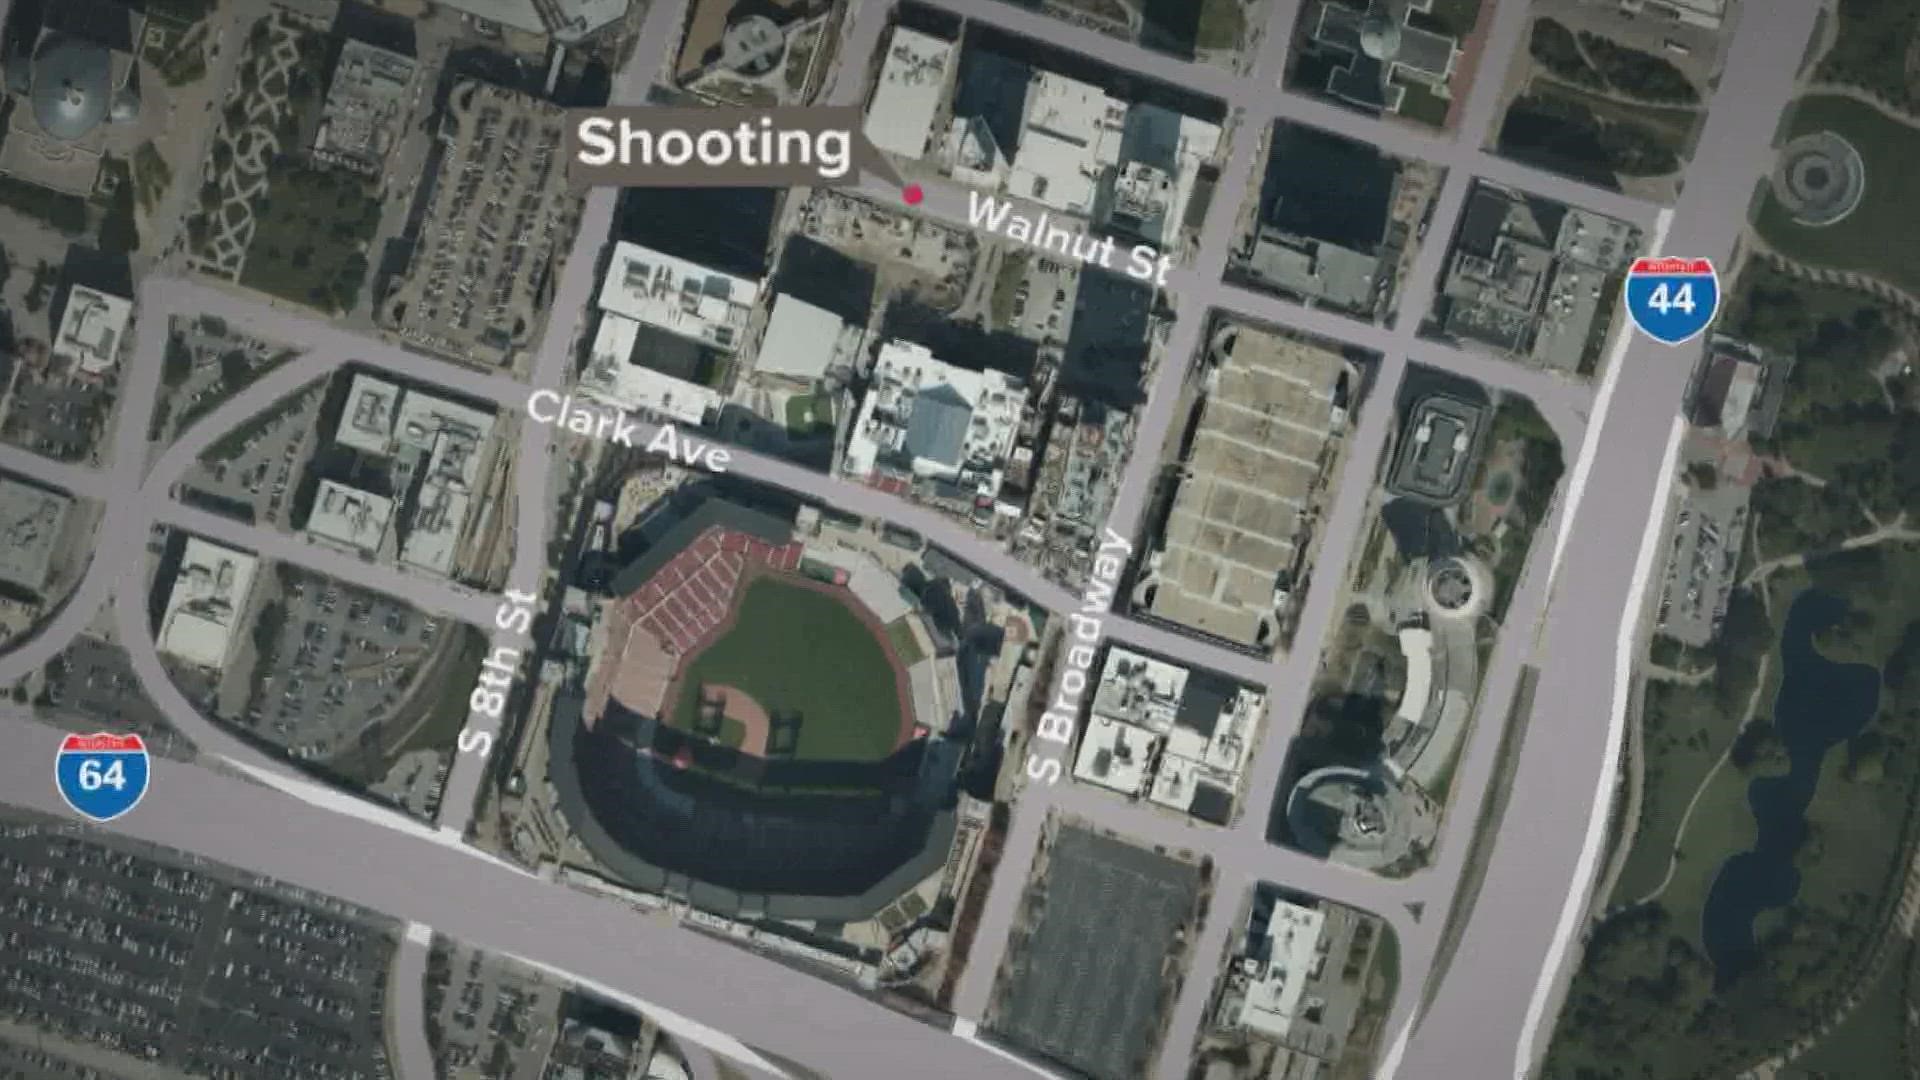 A spokesperson for Ballpark Village said in a statement safety and security is their top priority.